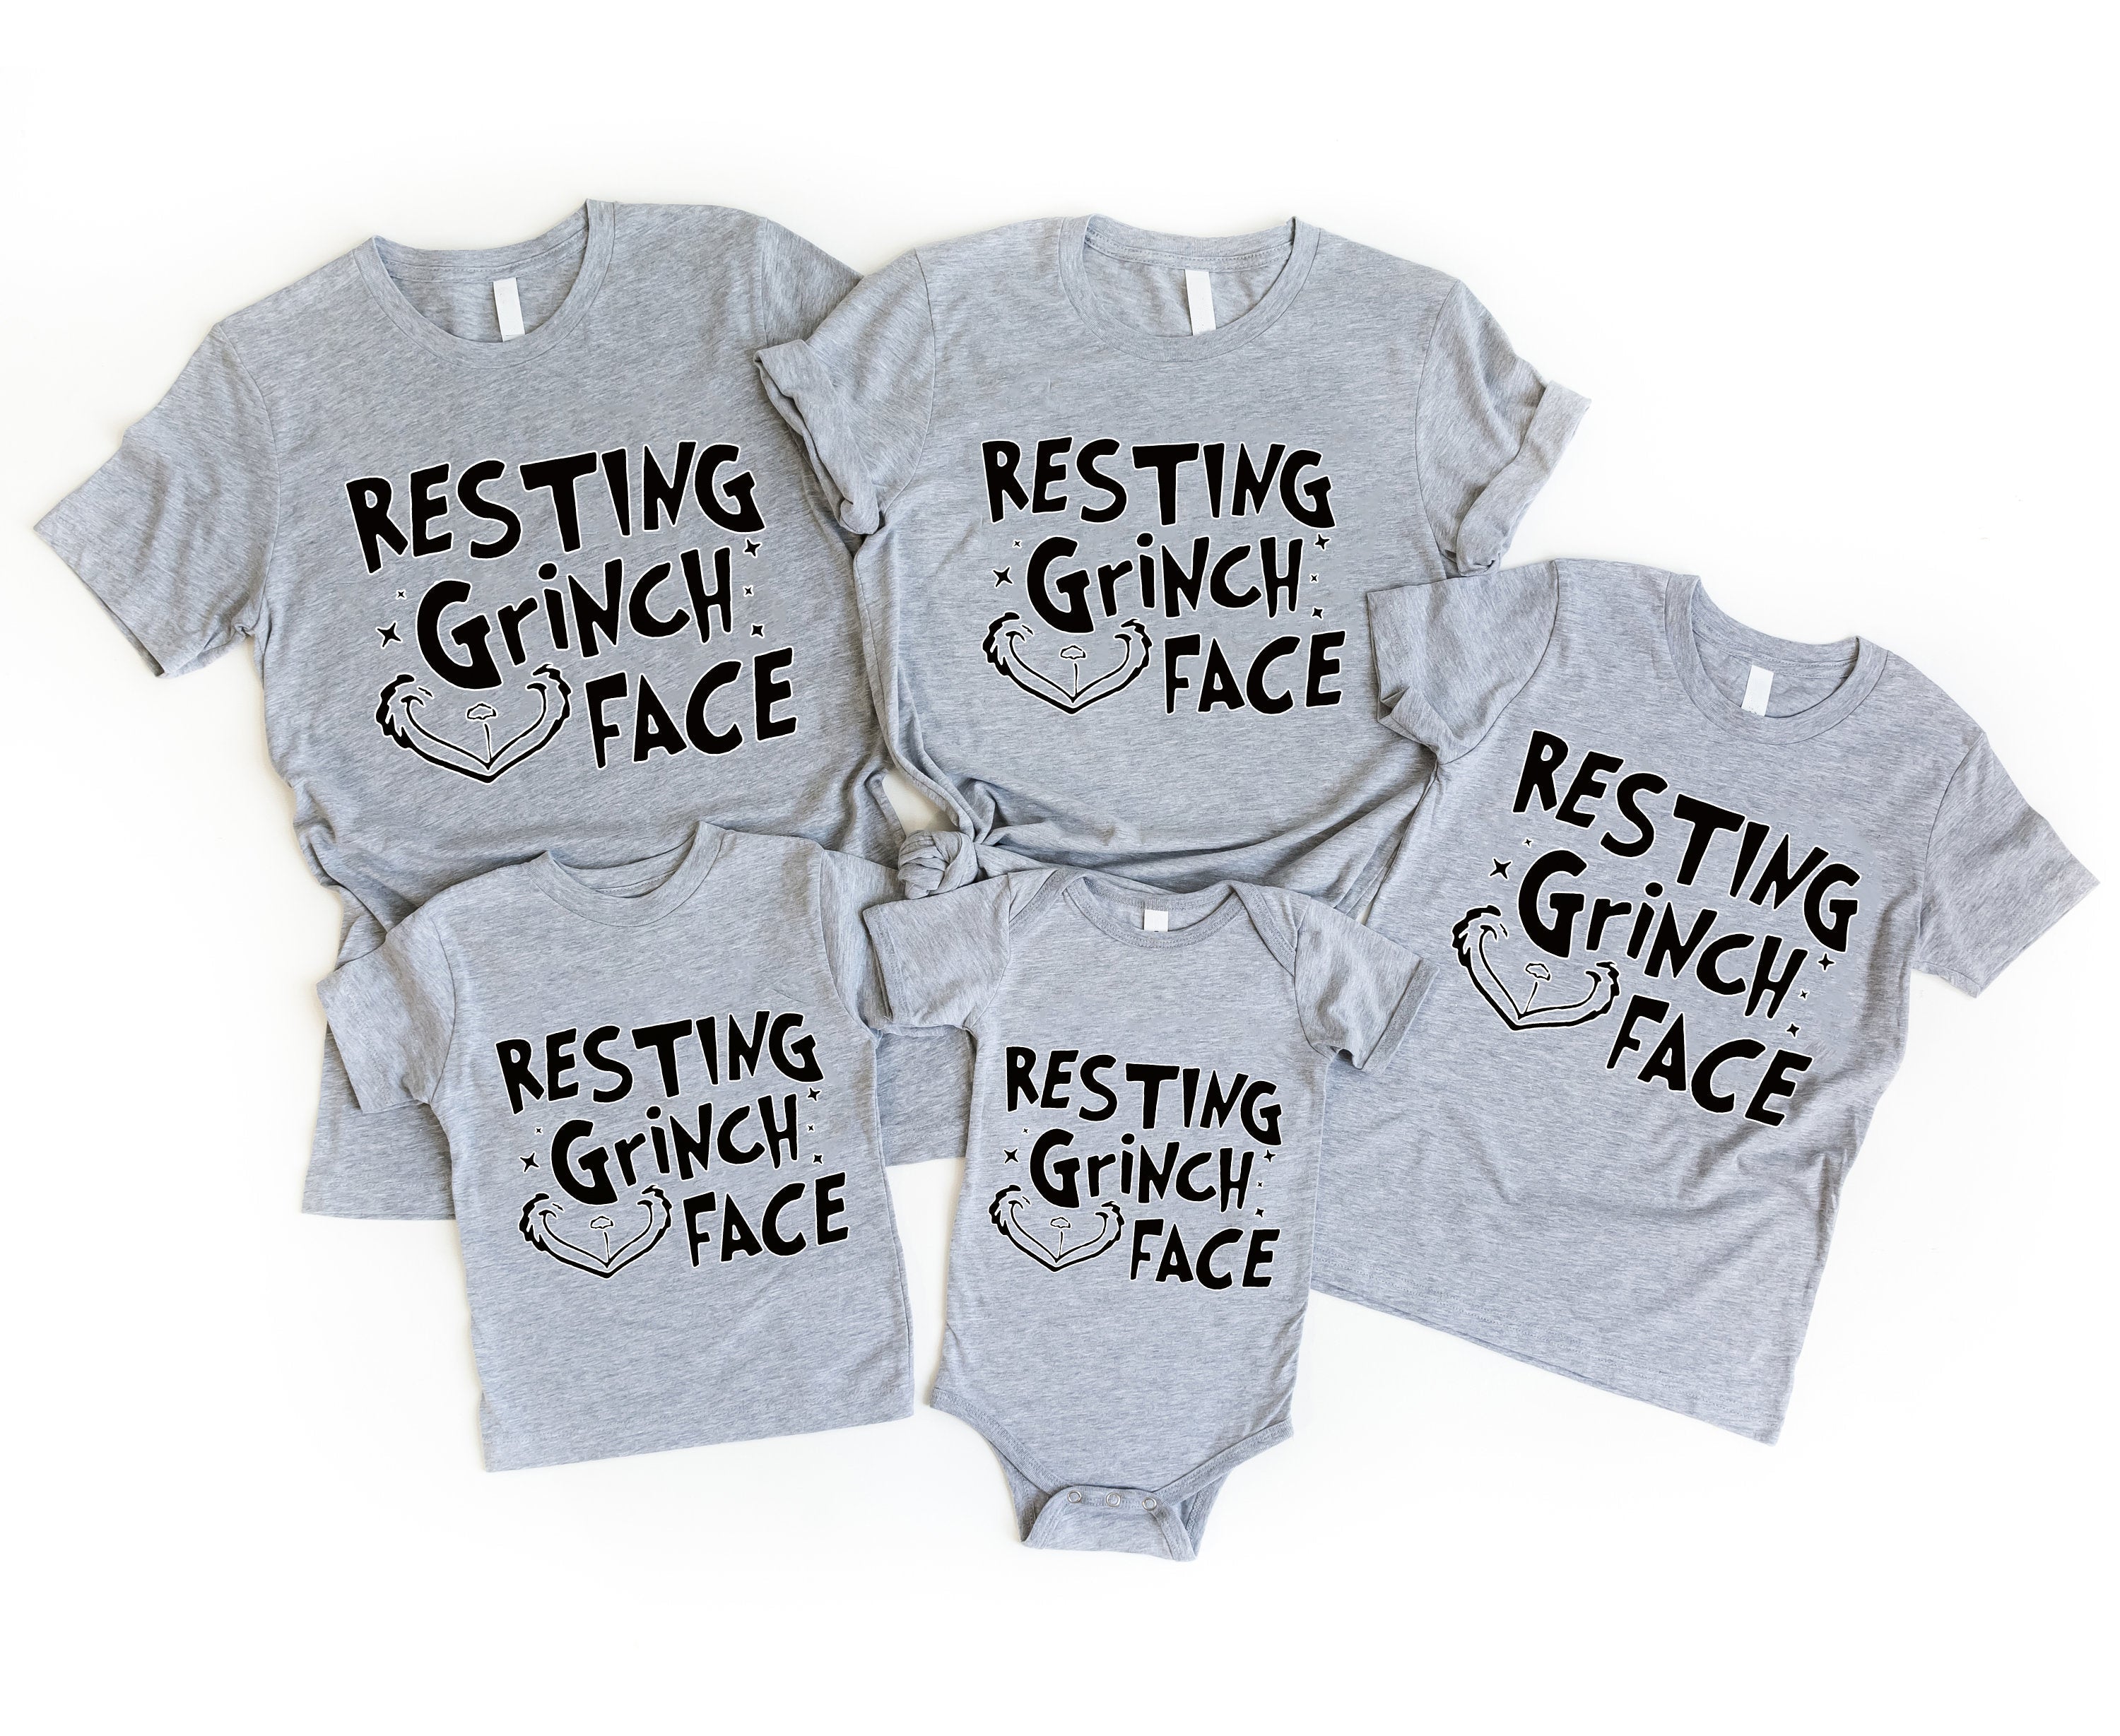 'Resting Face' Black Letter Pattern Family Christmas Matching Pajamas Tops Cute Gray Short Sleeve T-shirts With Dog Bandana